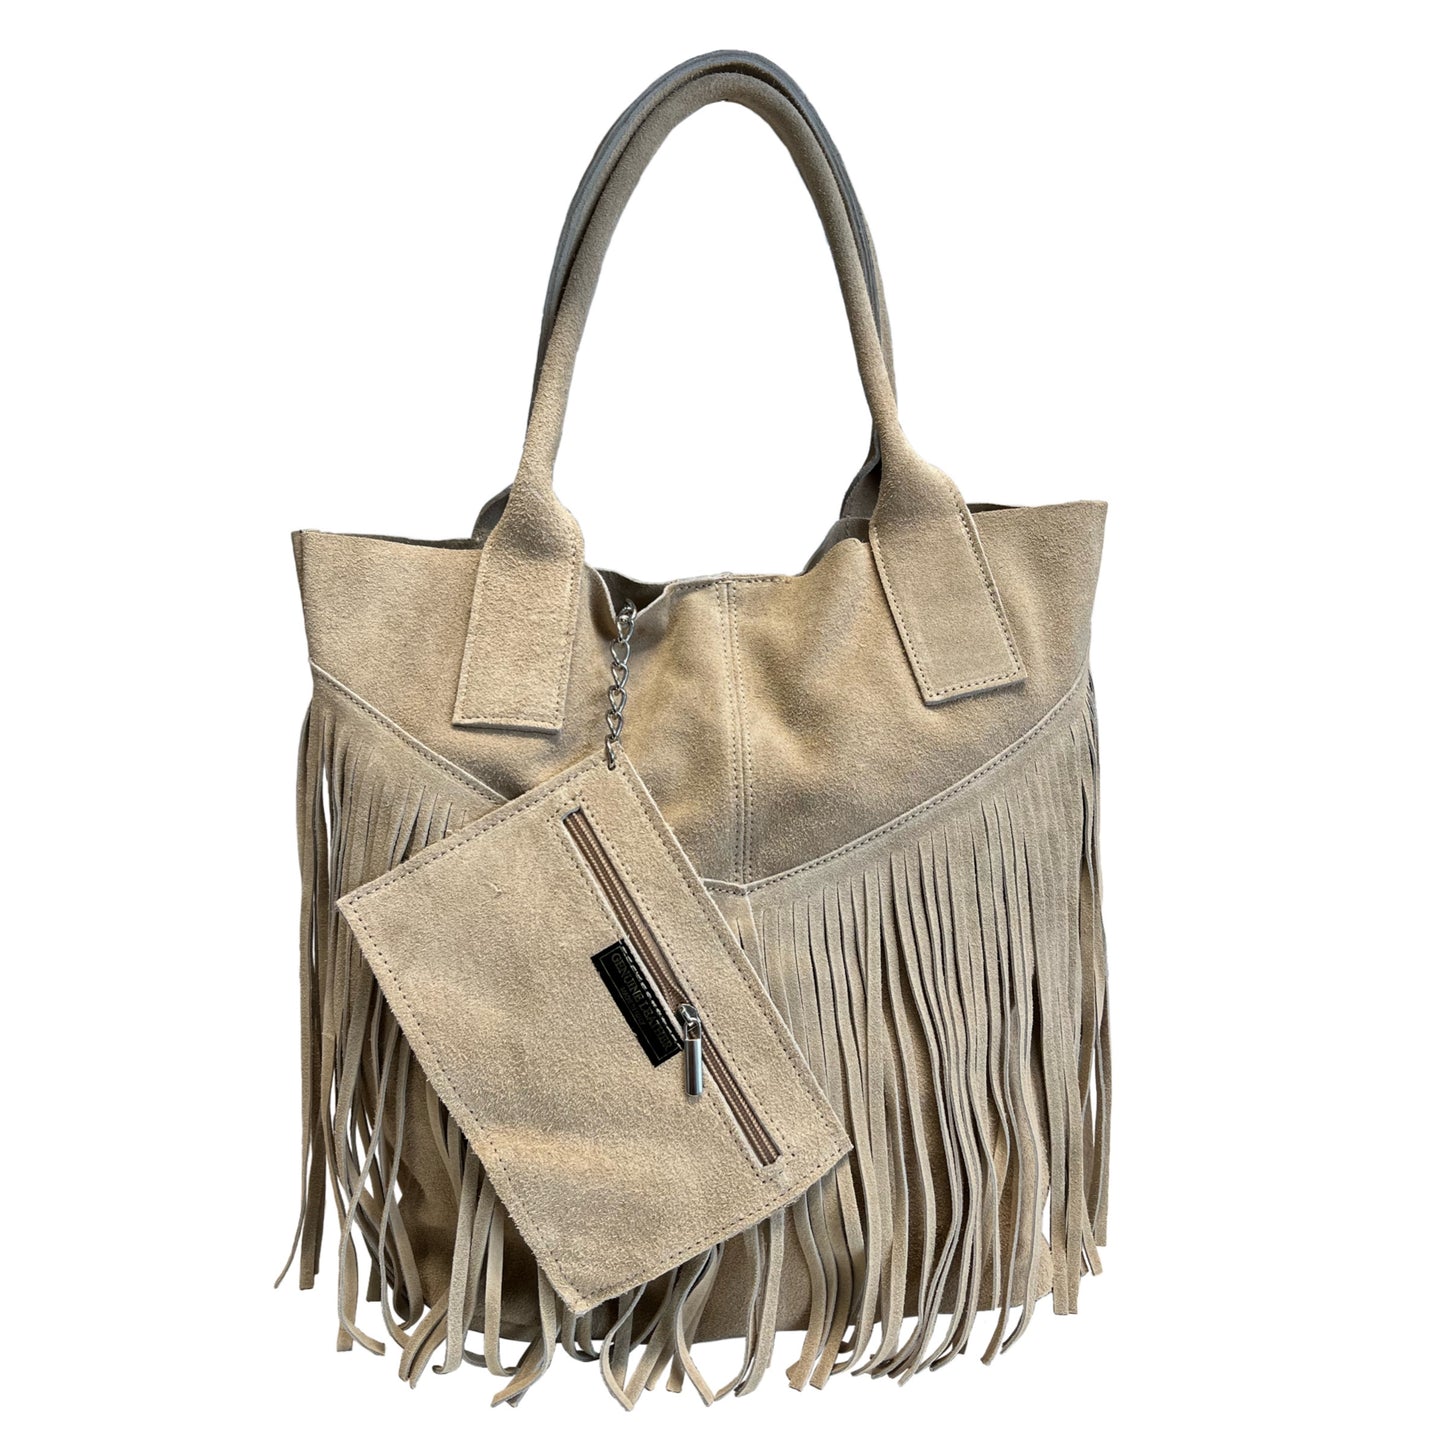 Modarno Women's shopper bag in genuine suede with fringe plus case for jewelry of the same color